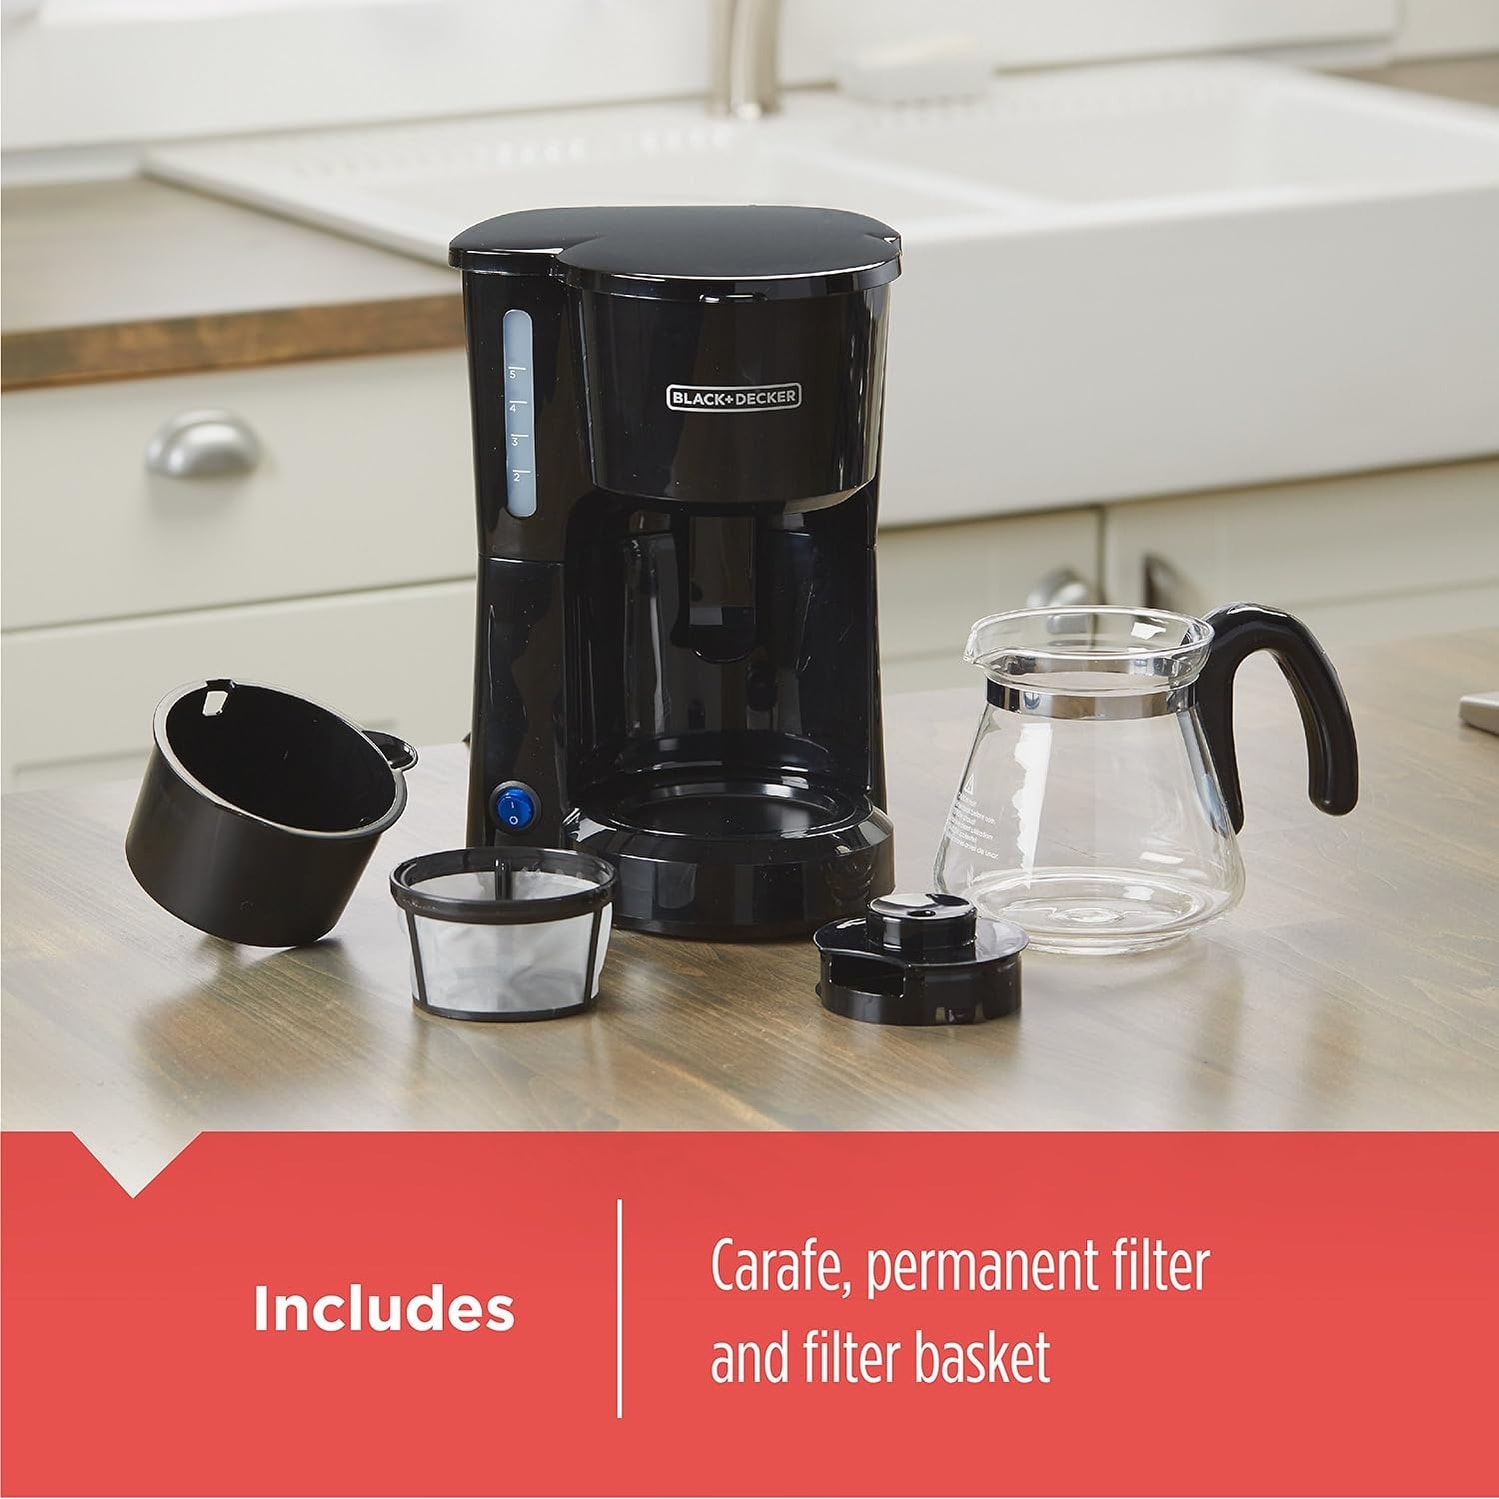 4-In-1 5-Cup Station Coffeemaker